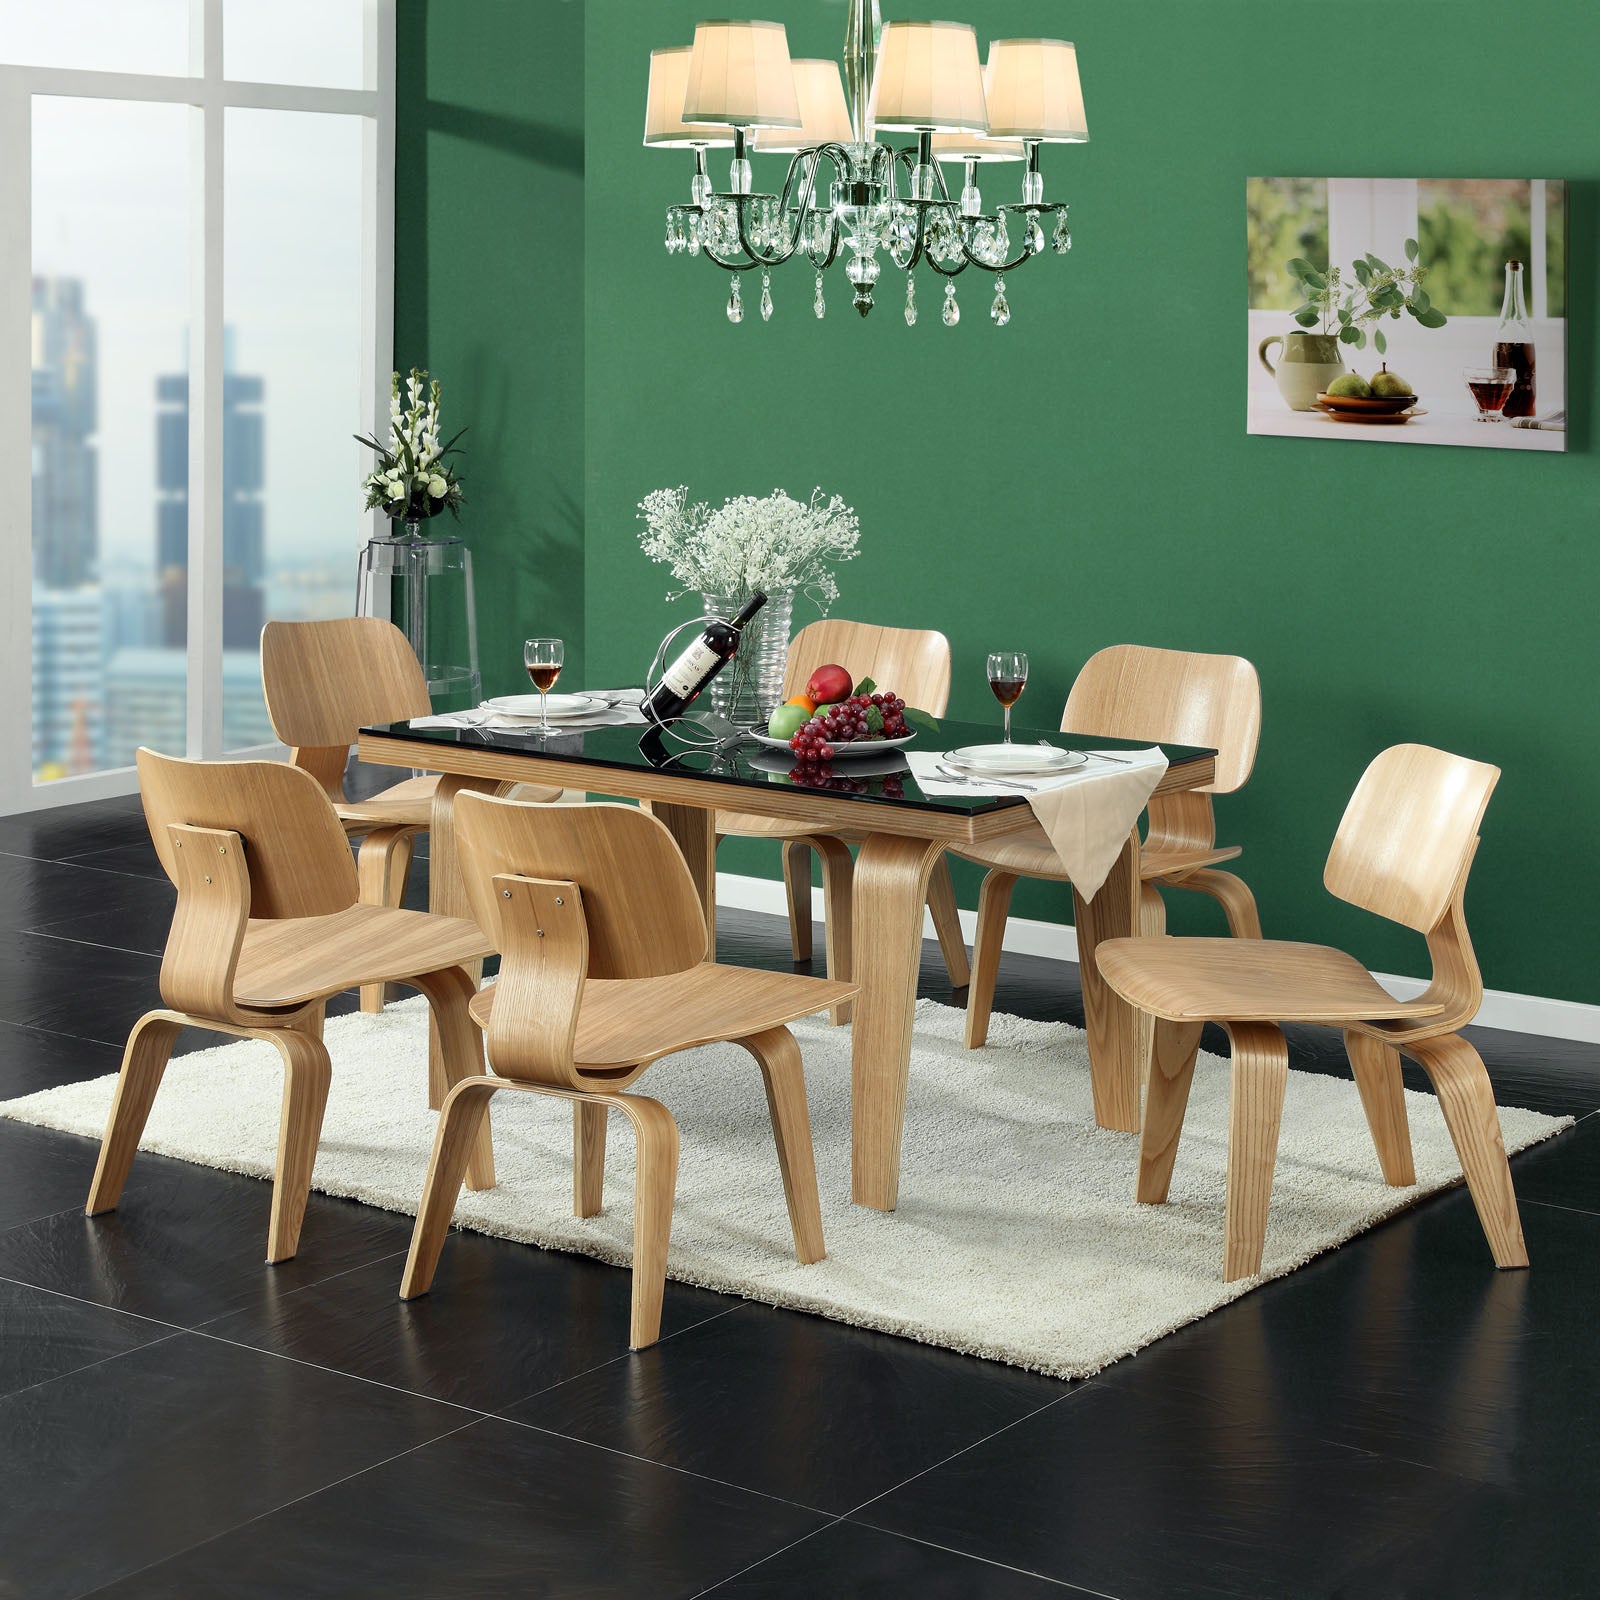 Fathom Dining Chairs Set of 2 - East Shore Modern Home Furnishings